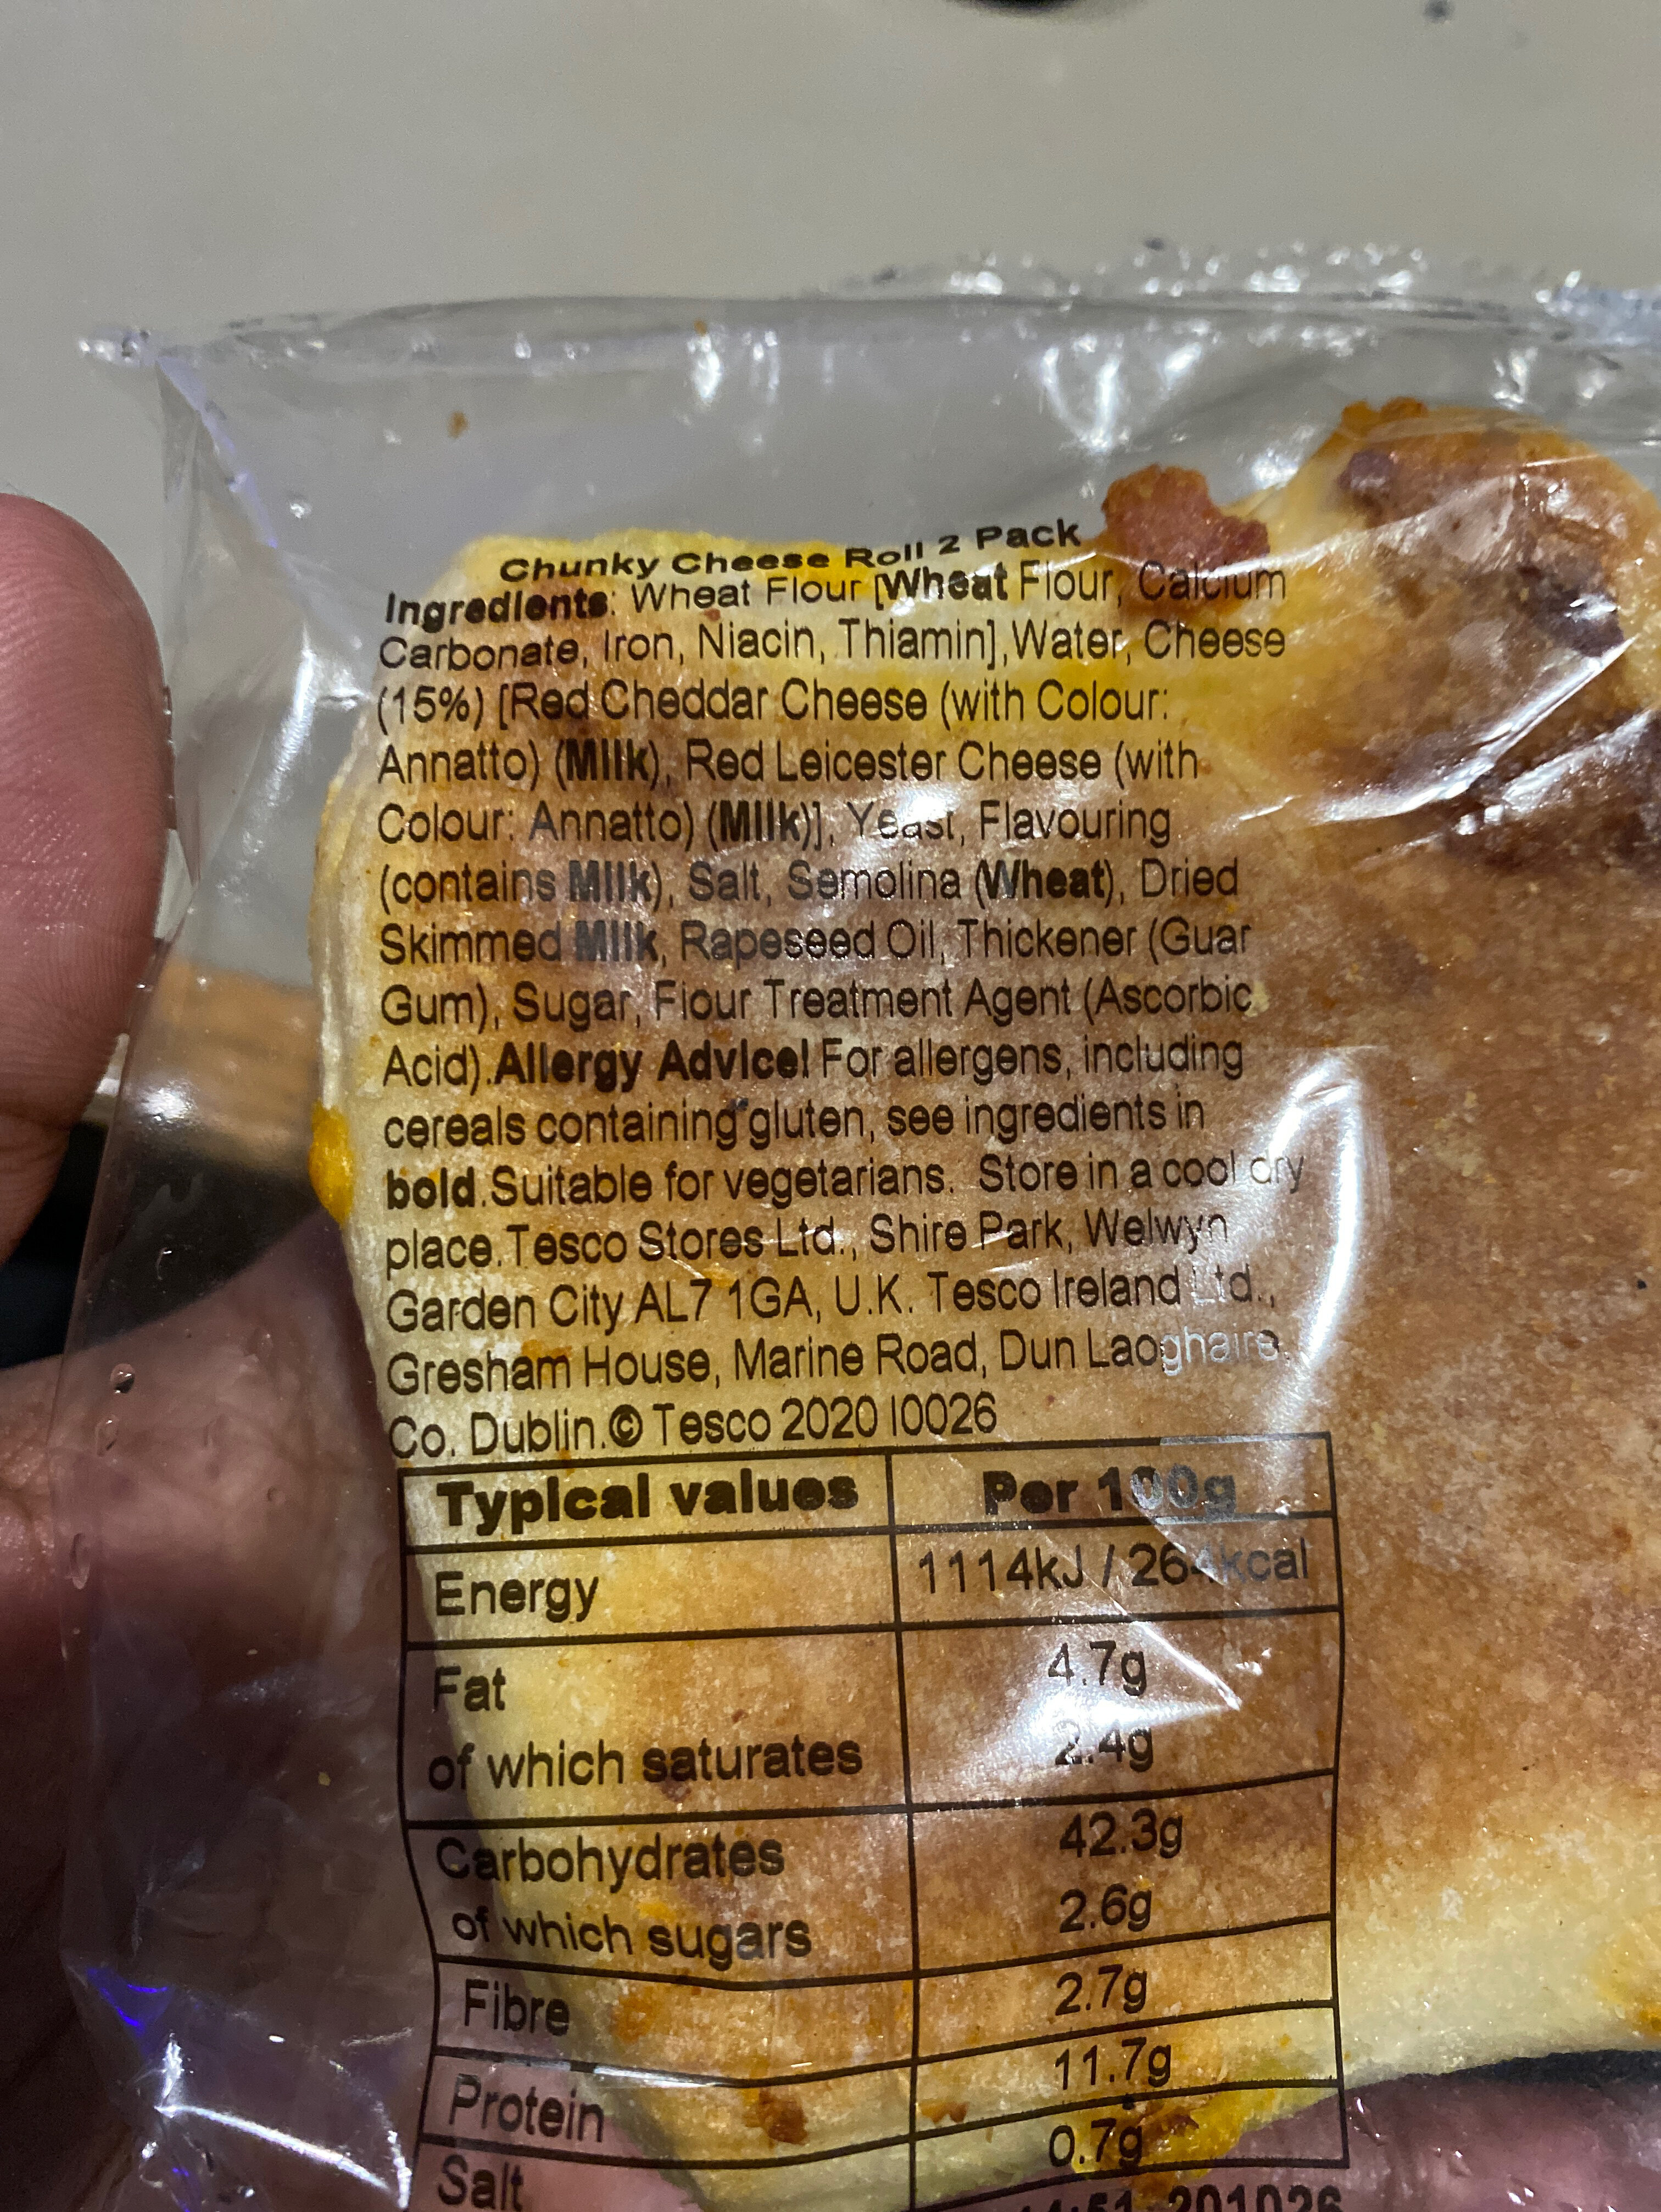 Tesco Chunky Cheese Roll - Ingredients